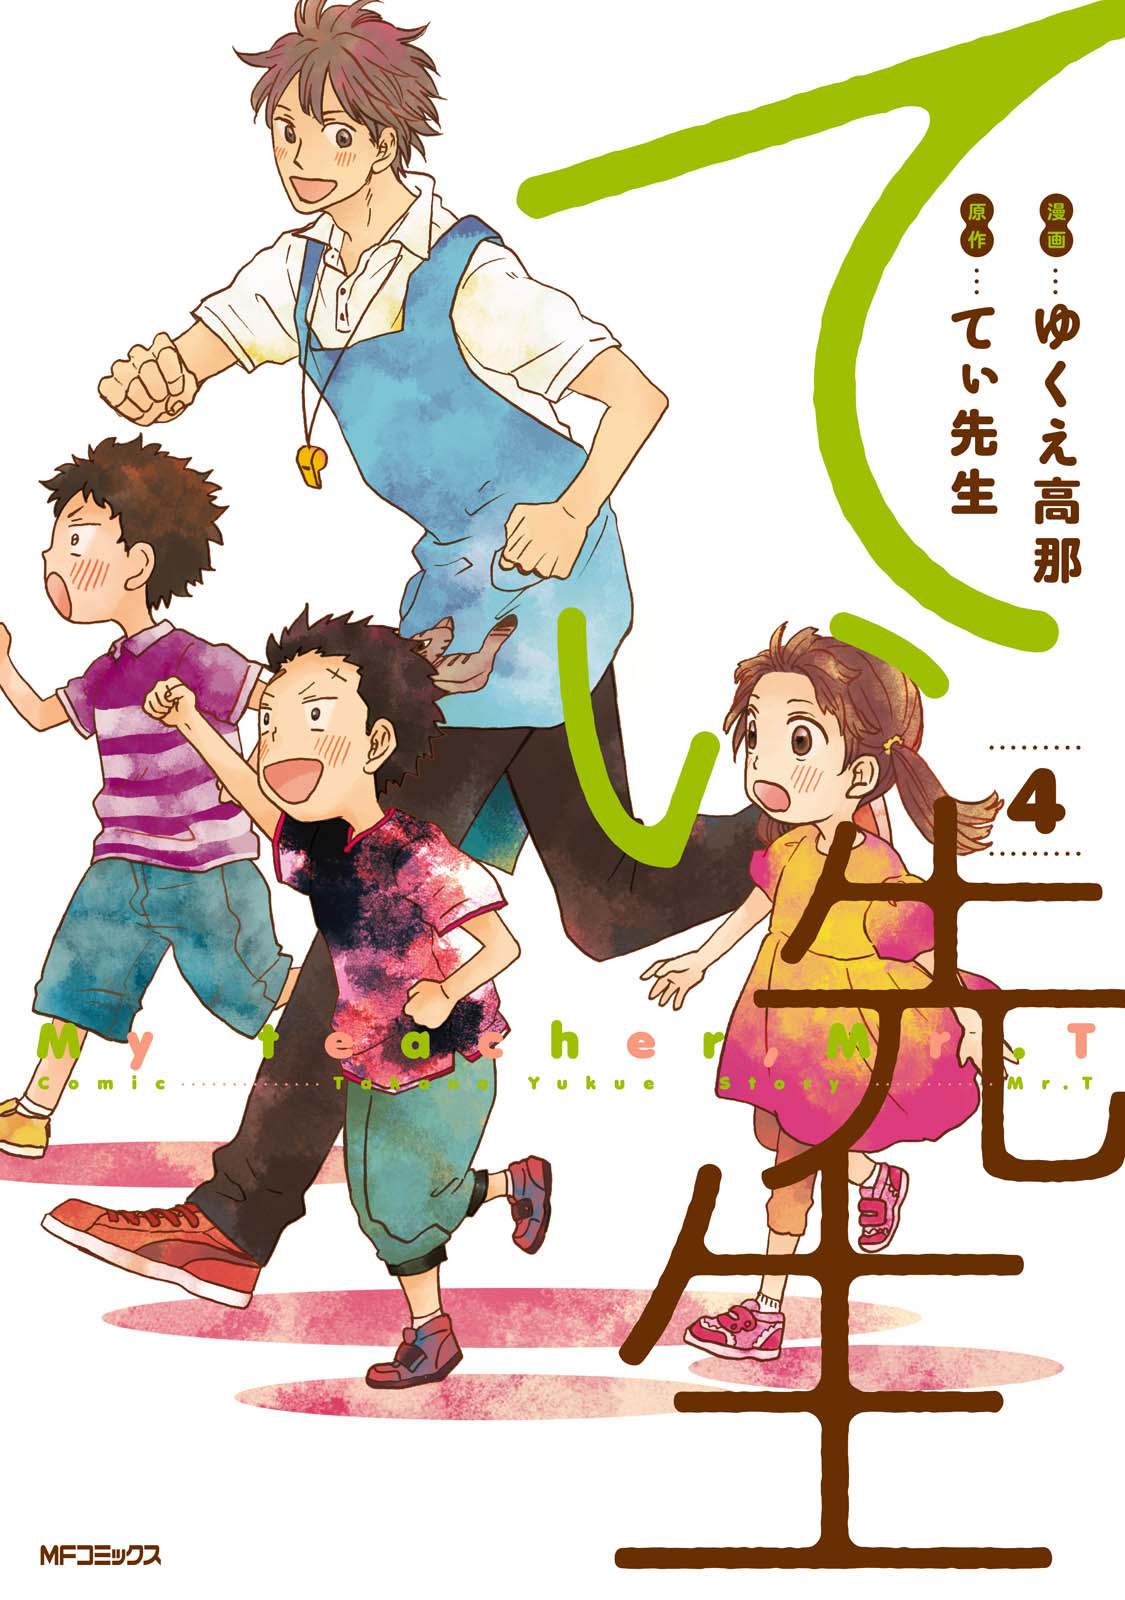 T Sensei Vol. 4 Ch. 19 Spring is Coming for Everyone